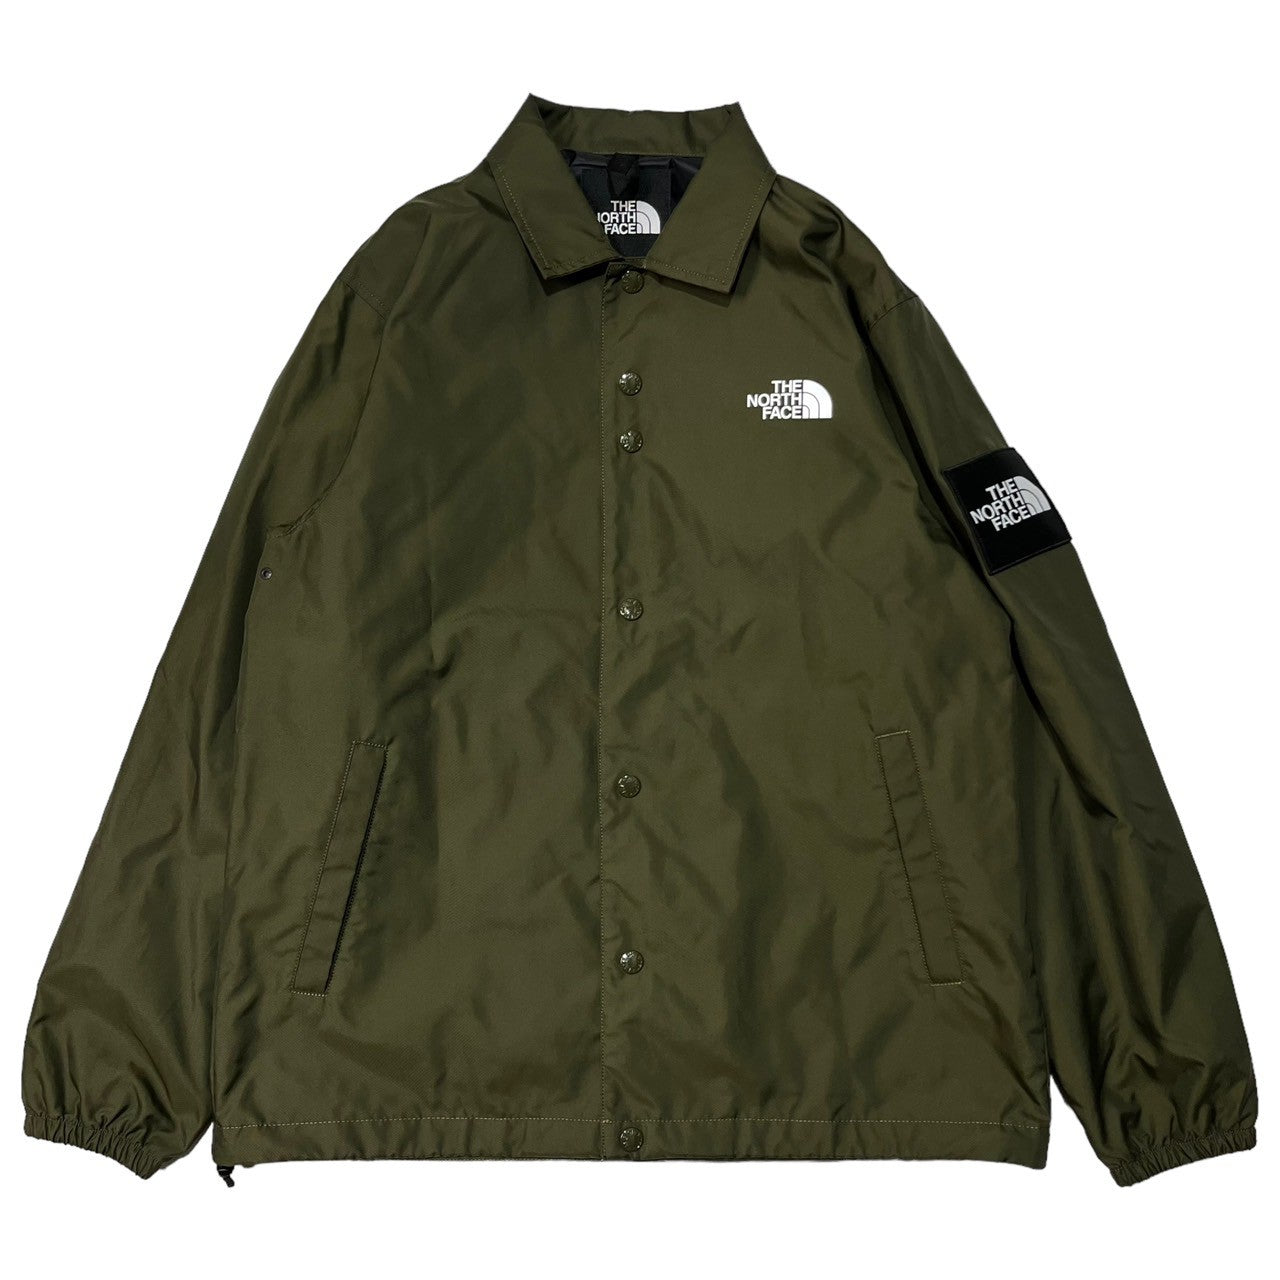 THE NORTH FACE(ザノースフェイス) The Coach Jacket ザ コーチ ...